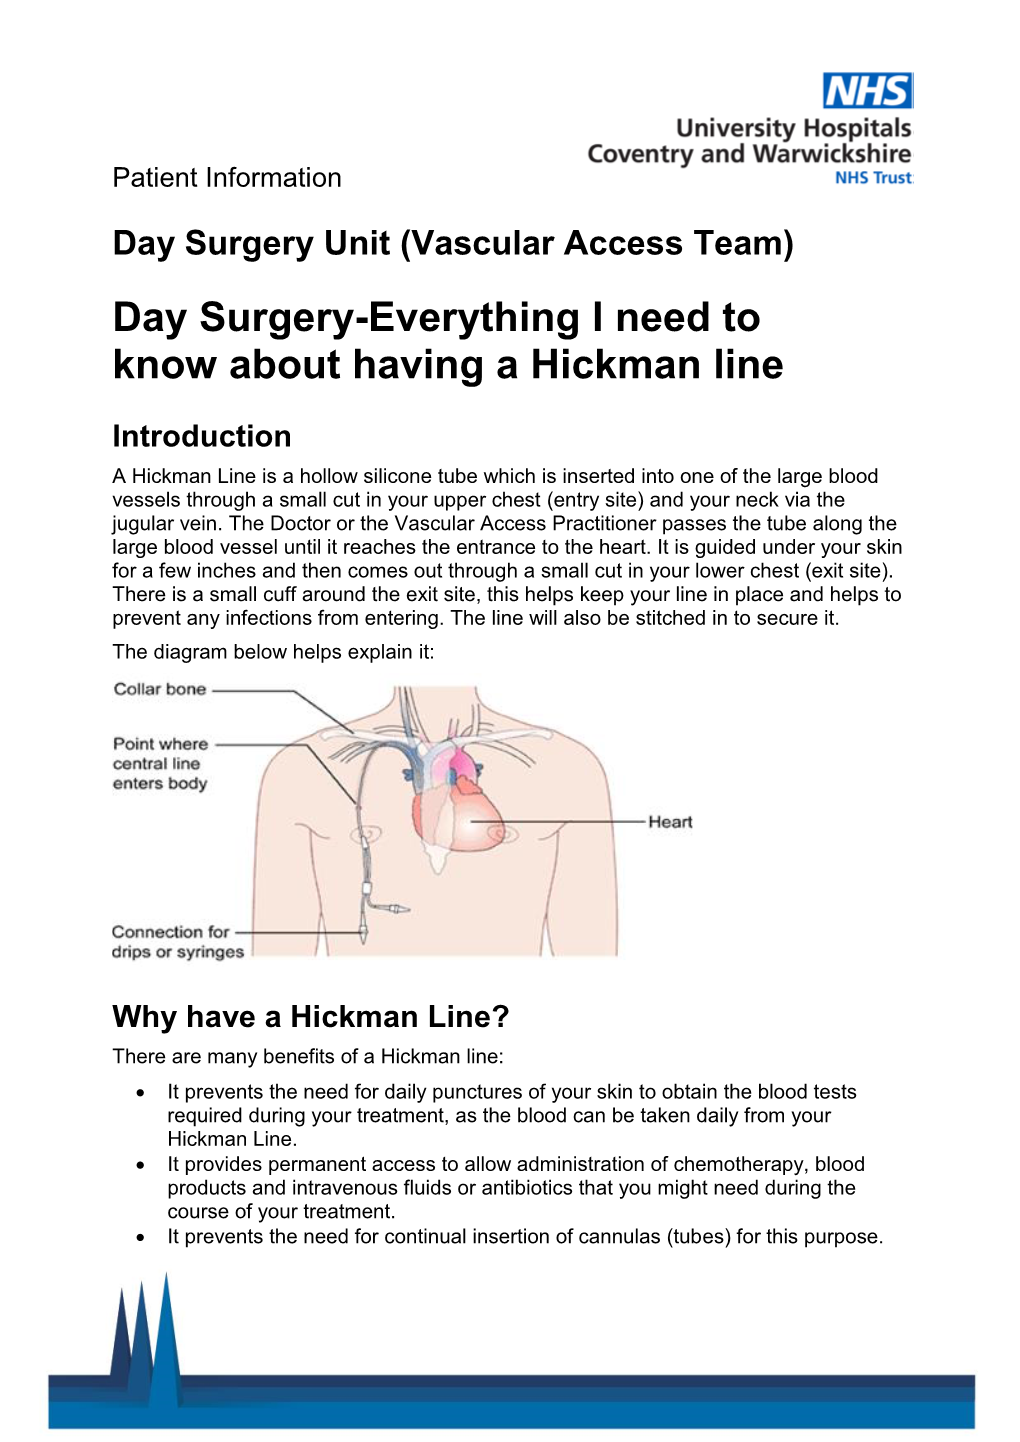 Day Surgery-Everything I Need to Know About Having a Hickman Line